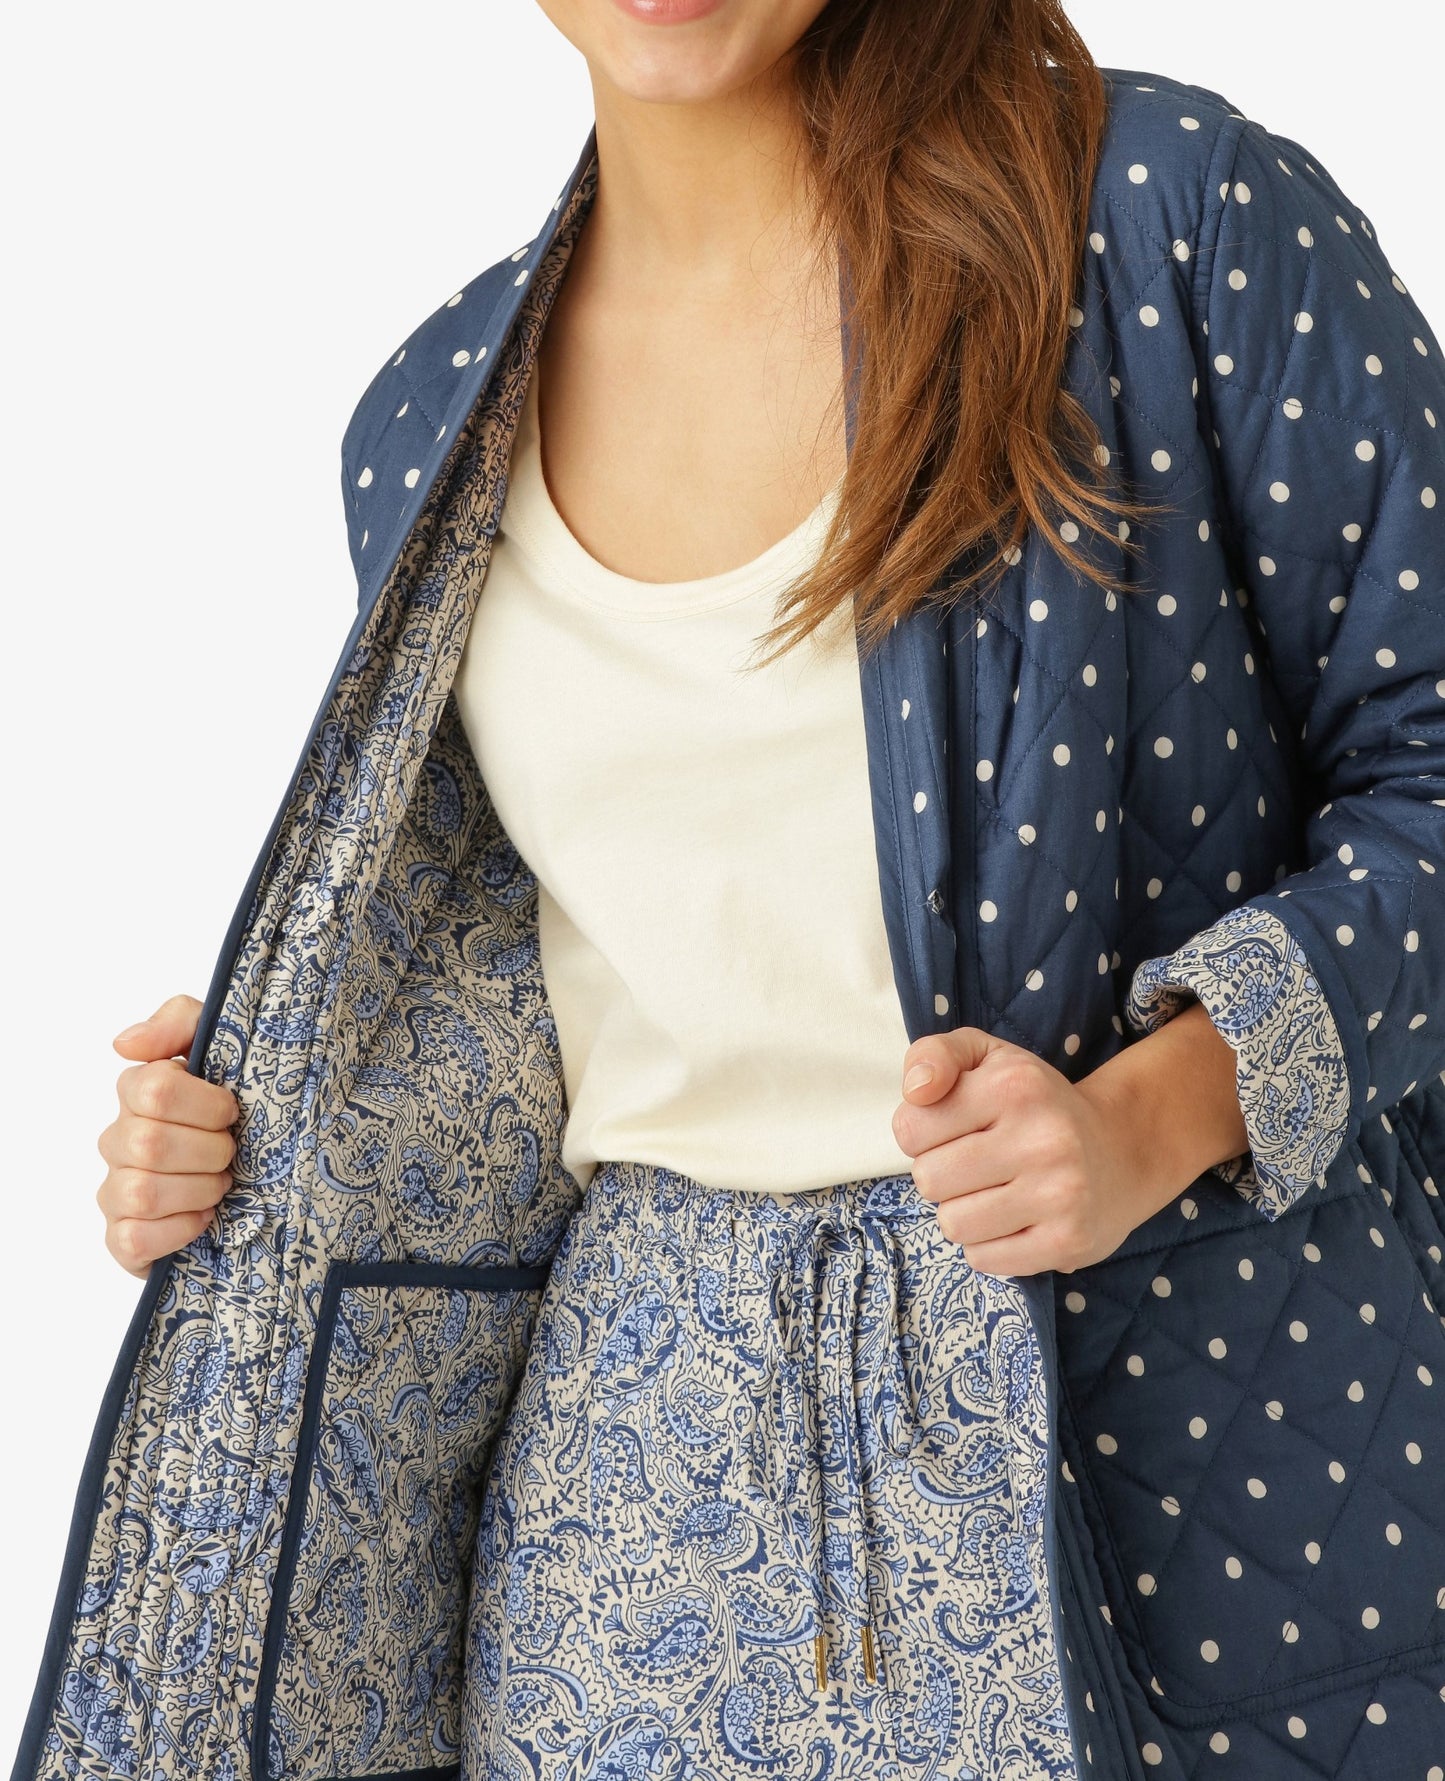 NOA QUILTED JACKET